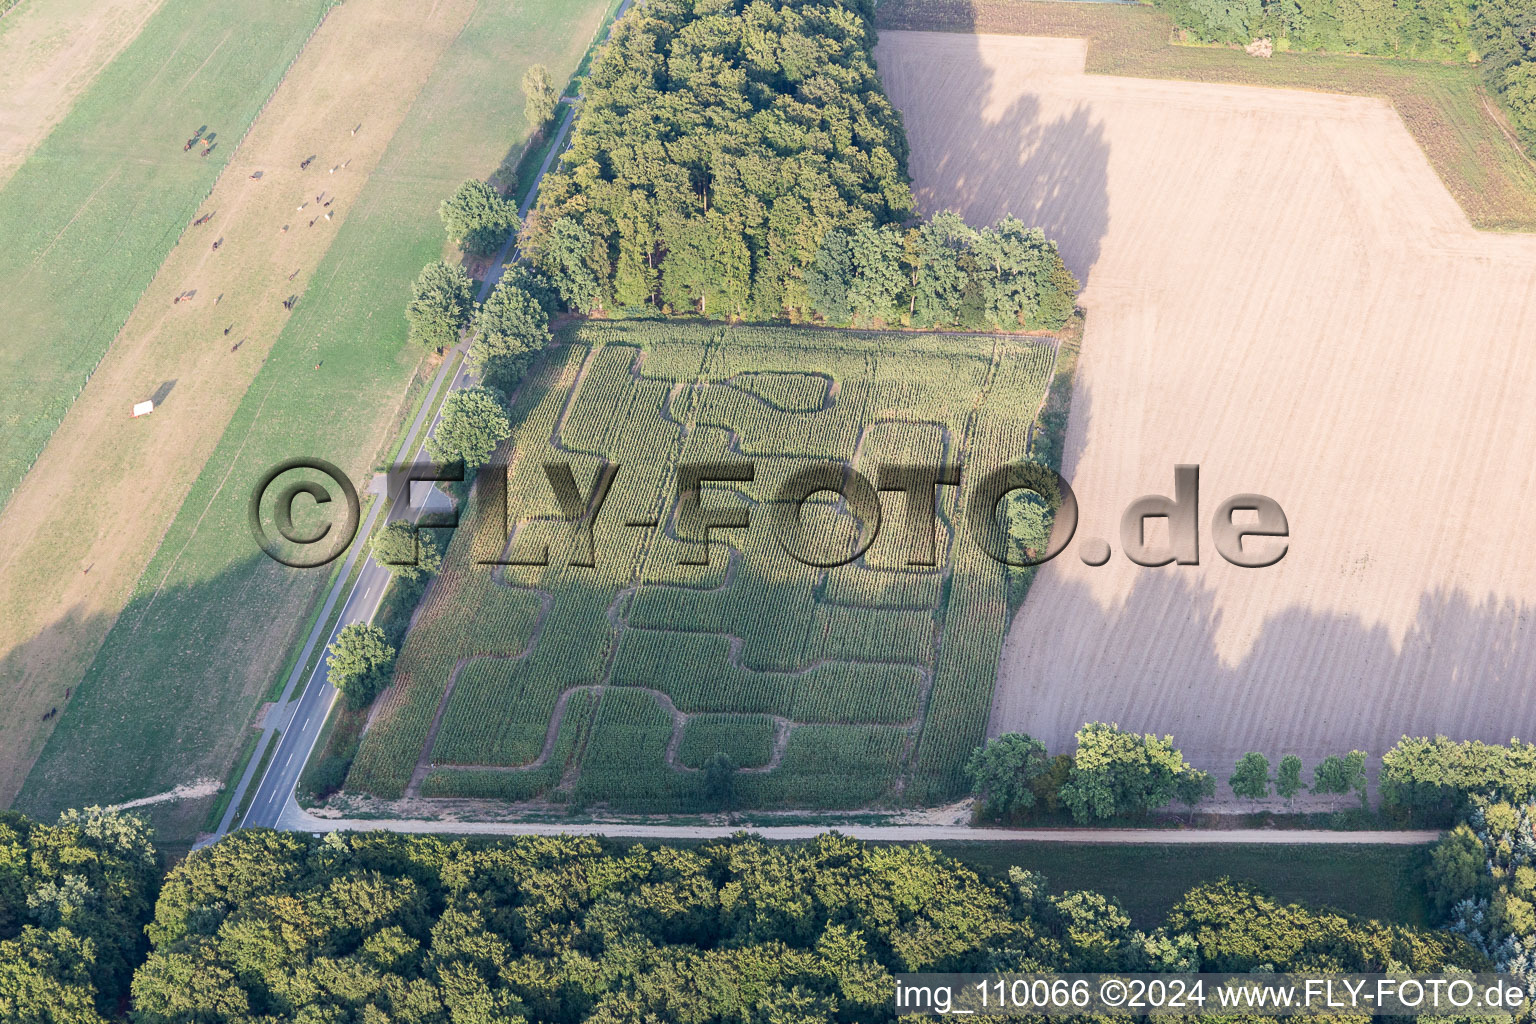 Maze - Labyrinth in a corn-field in Amelinghausen in the state Lower Saxony, Germany